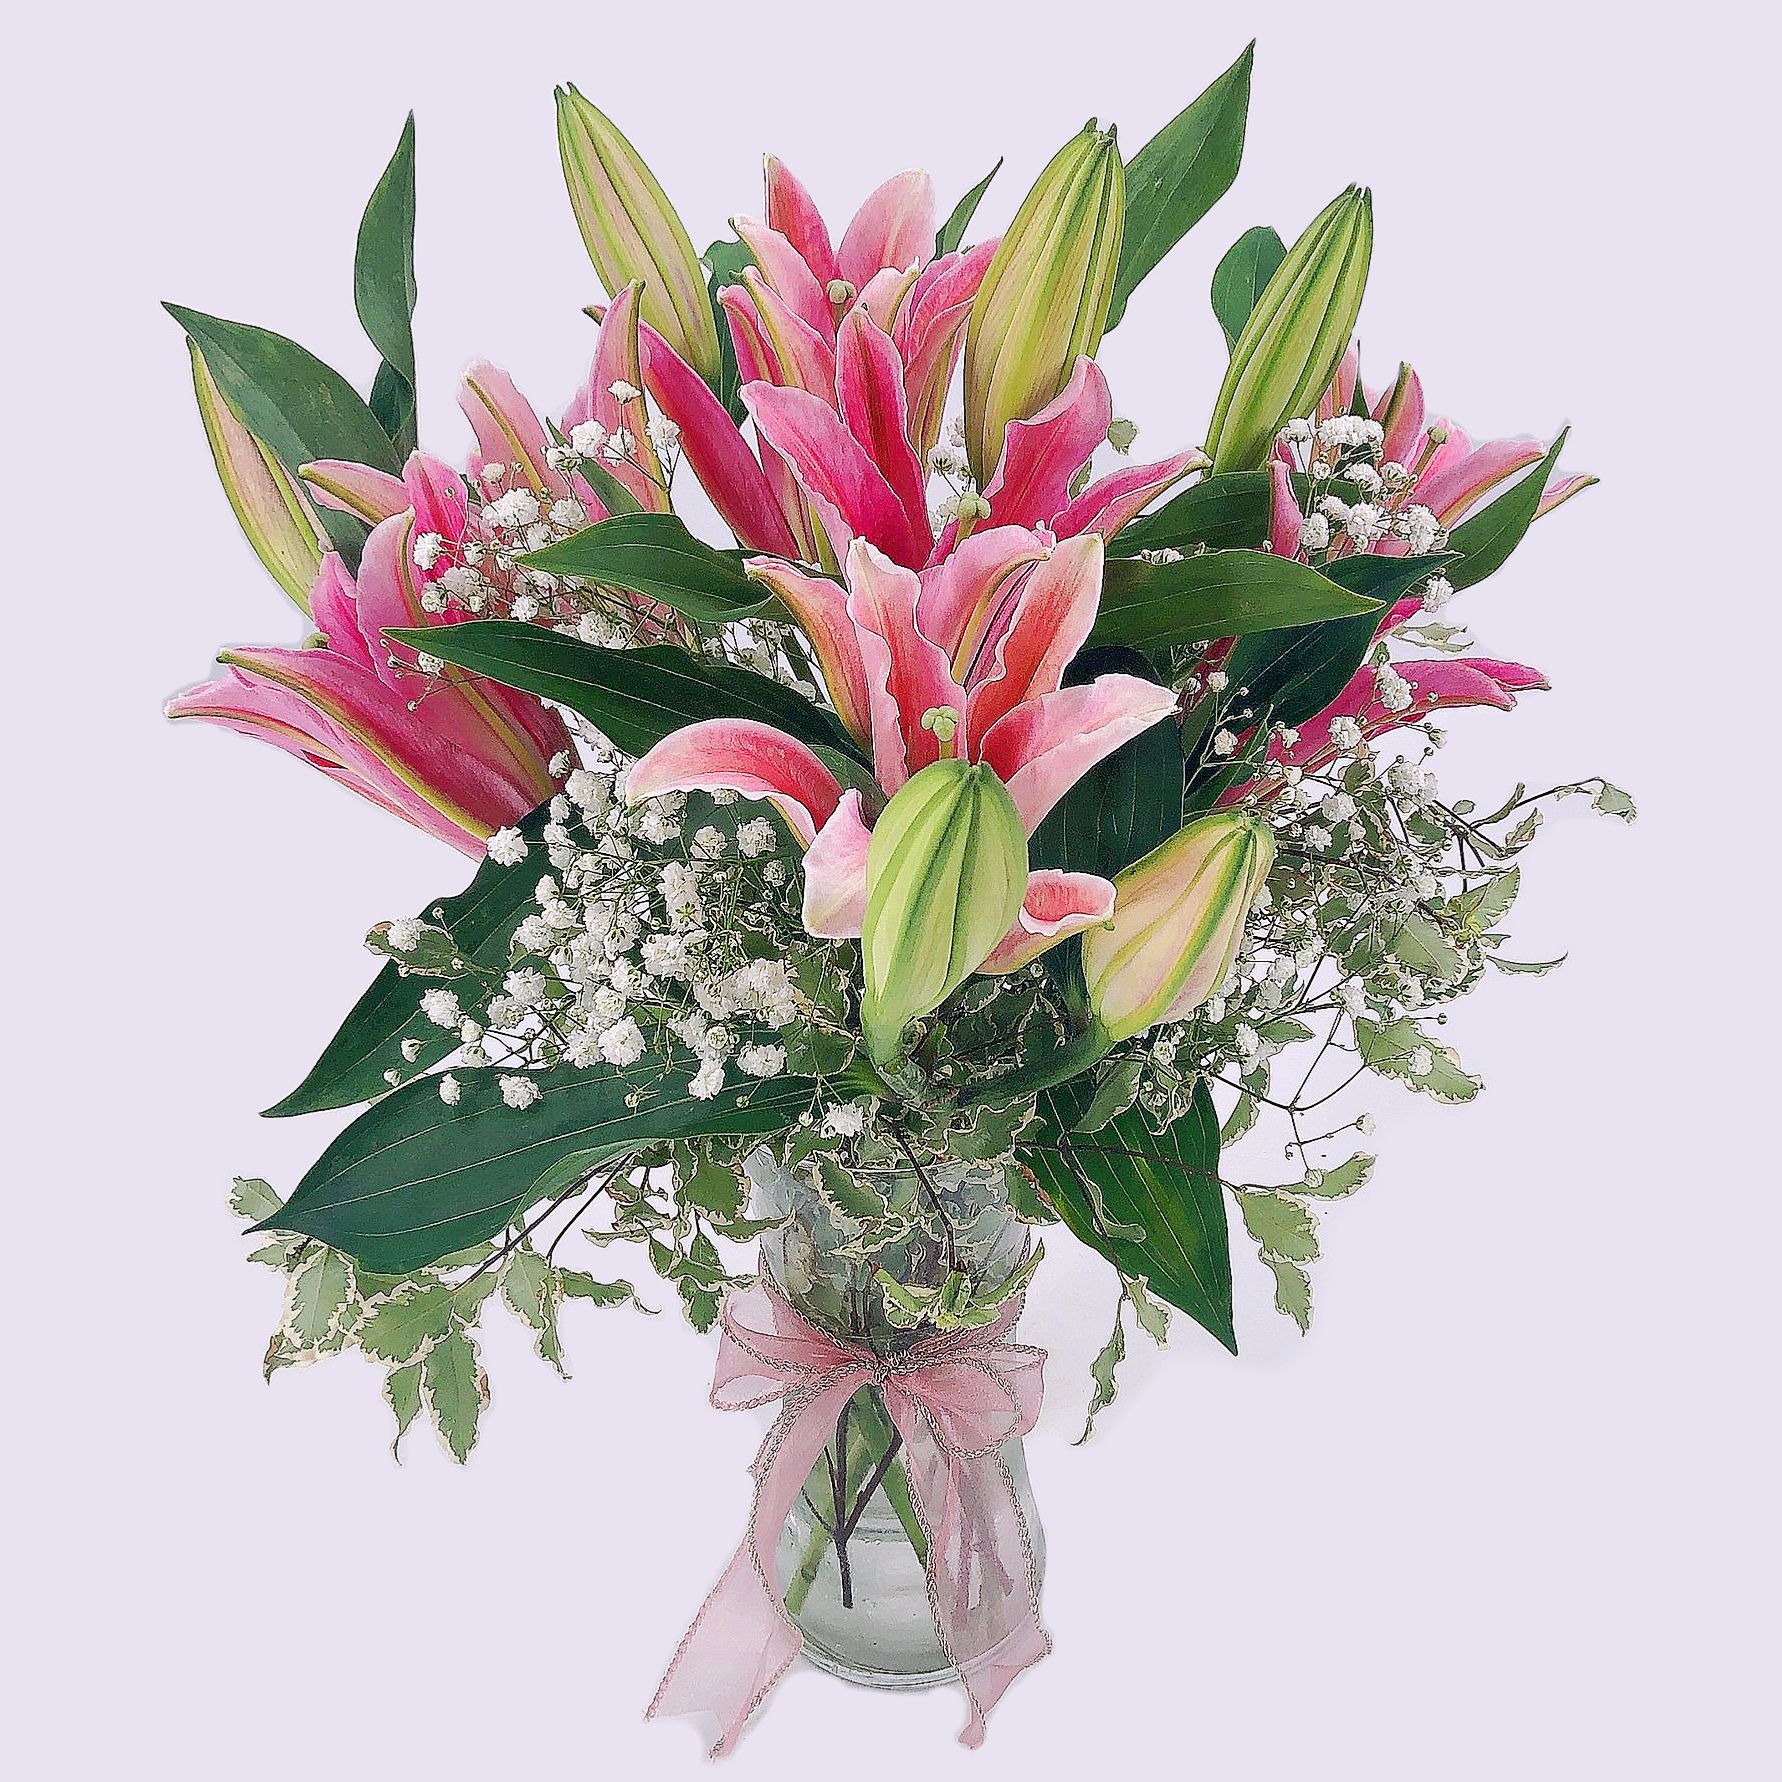 pink lilies as house warming flowers or birthday flowers